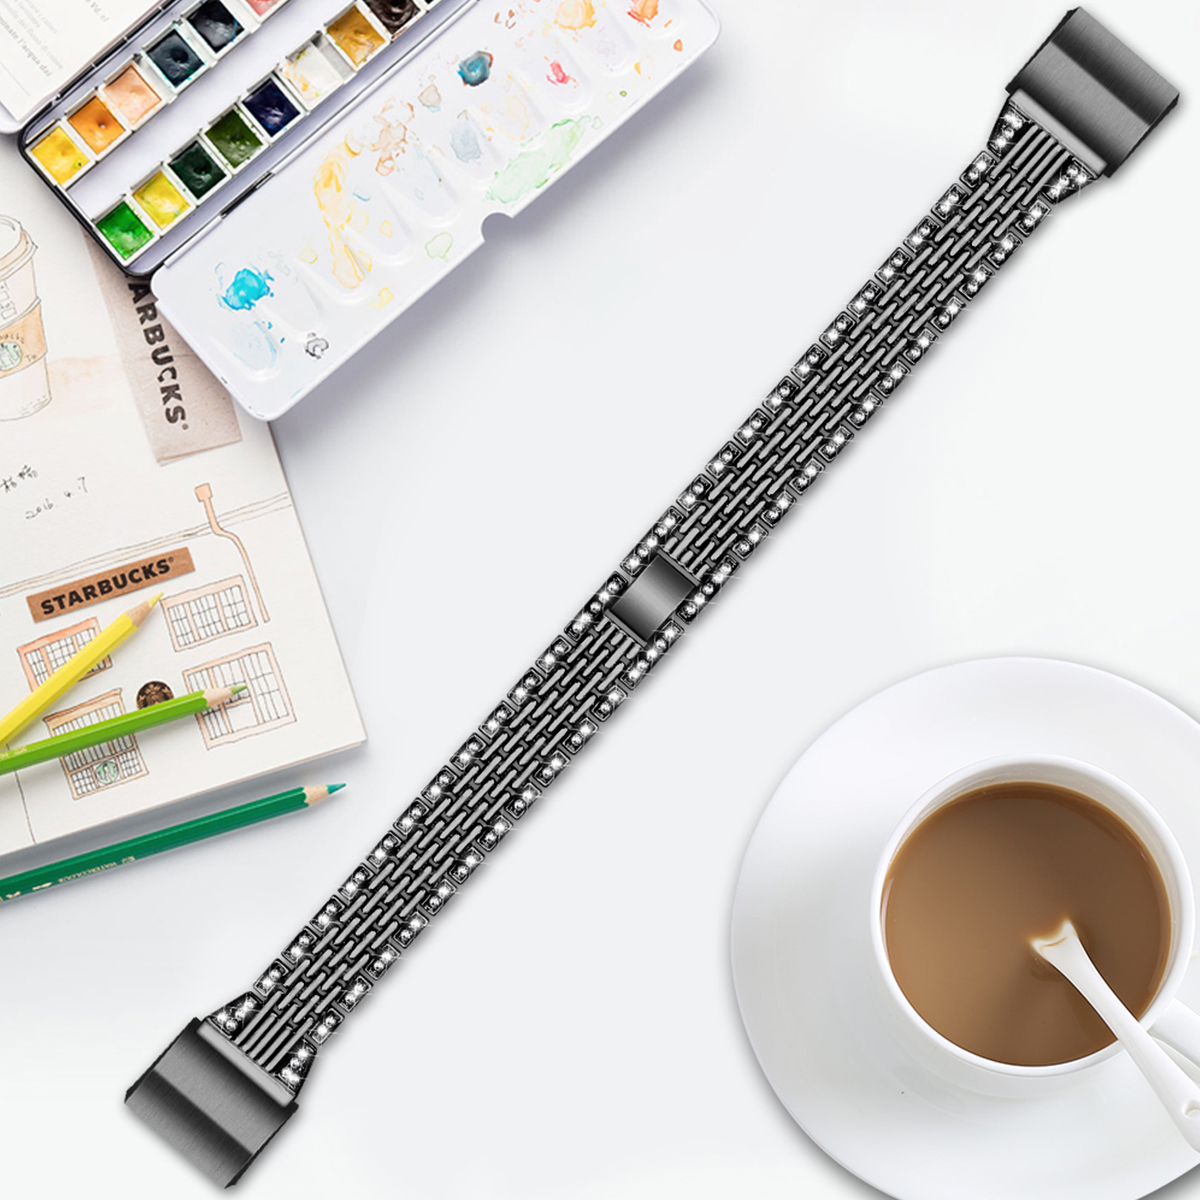 Luxury-Stainles-Steel-Watch-Band-Watch-Strap-Replacement-for-Fitbit-Charge-2-1534076-5